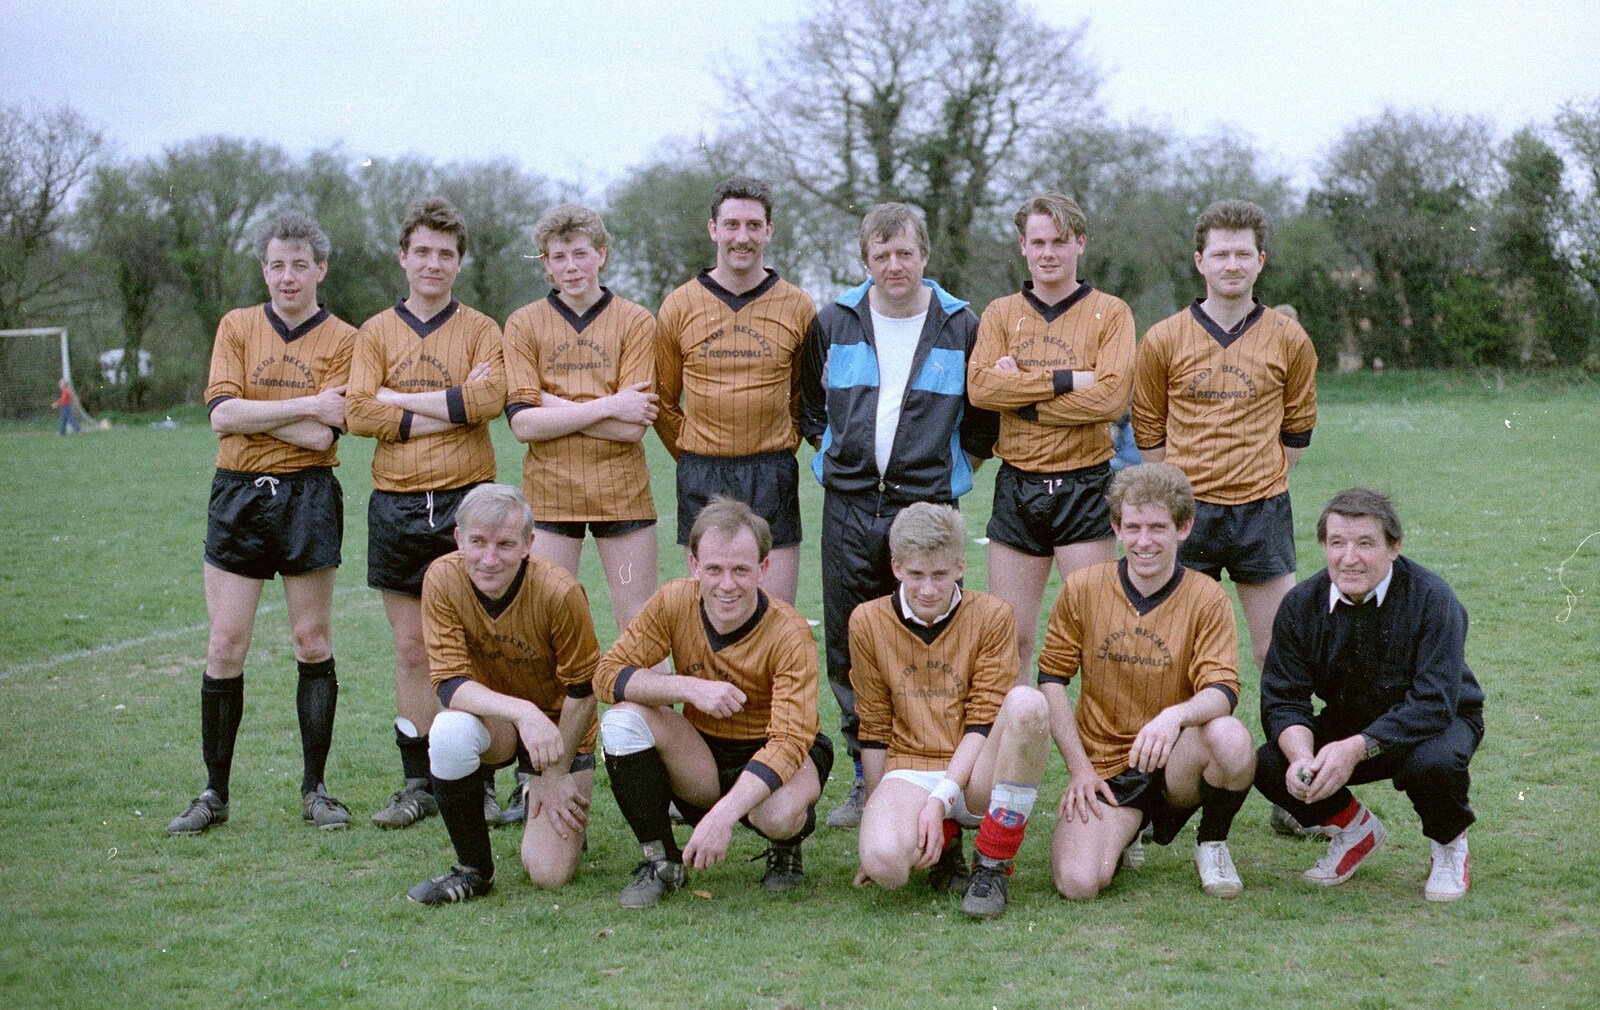 The Somans footie team from Soman-Wherry Footie Action, Norfolk - 25th February 1988